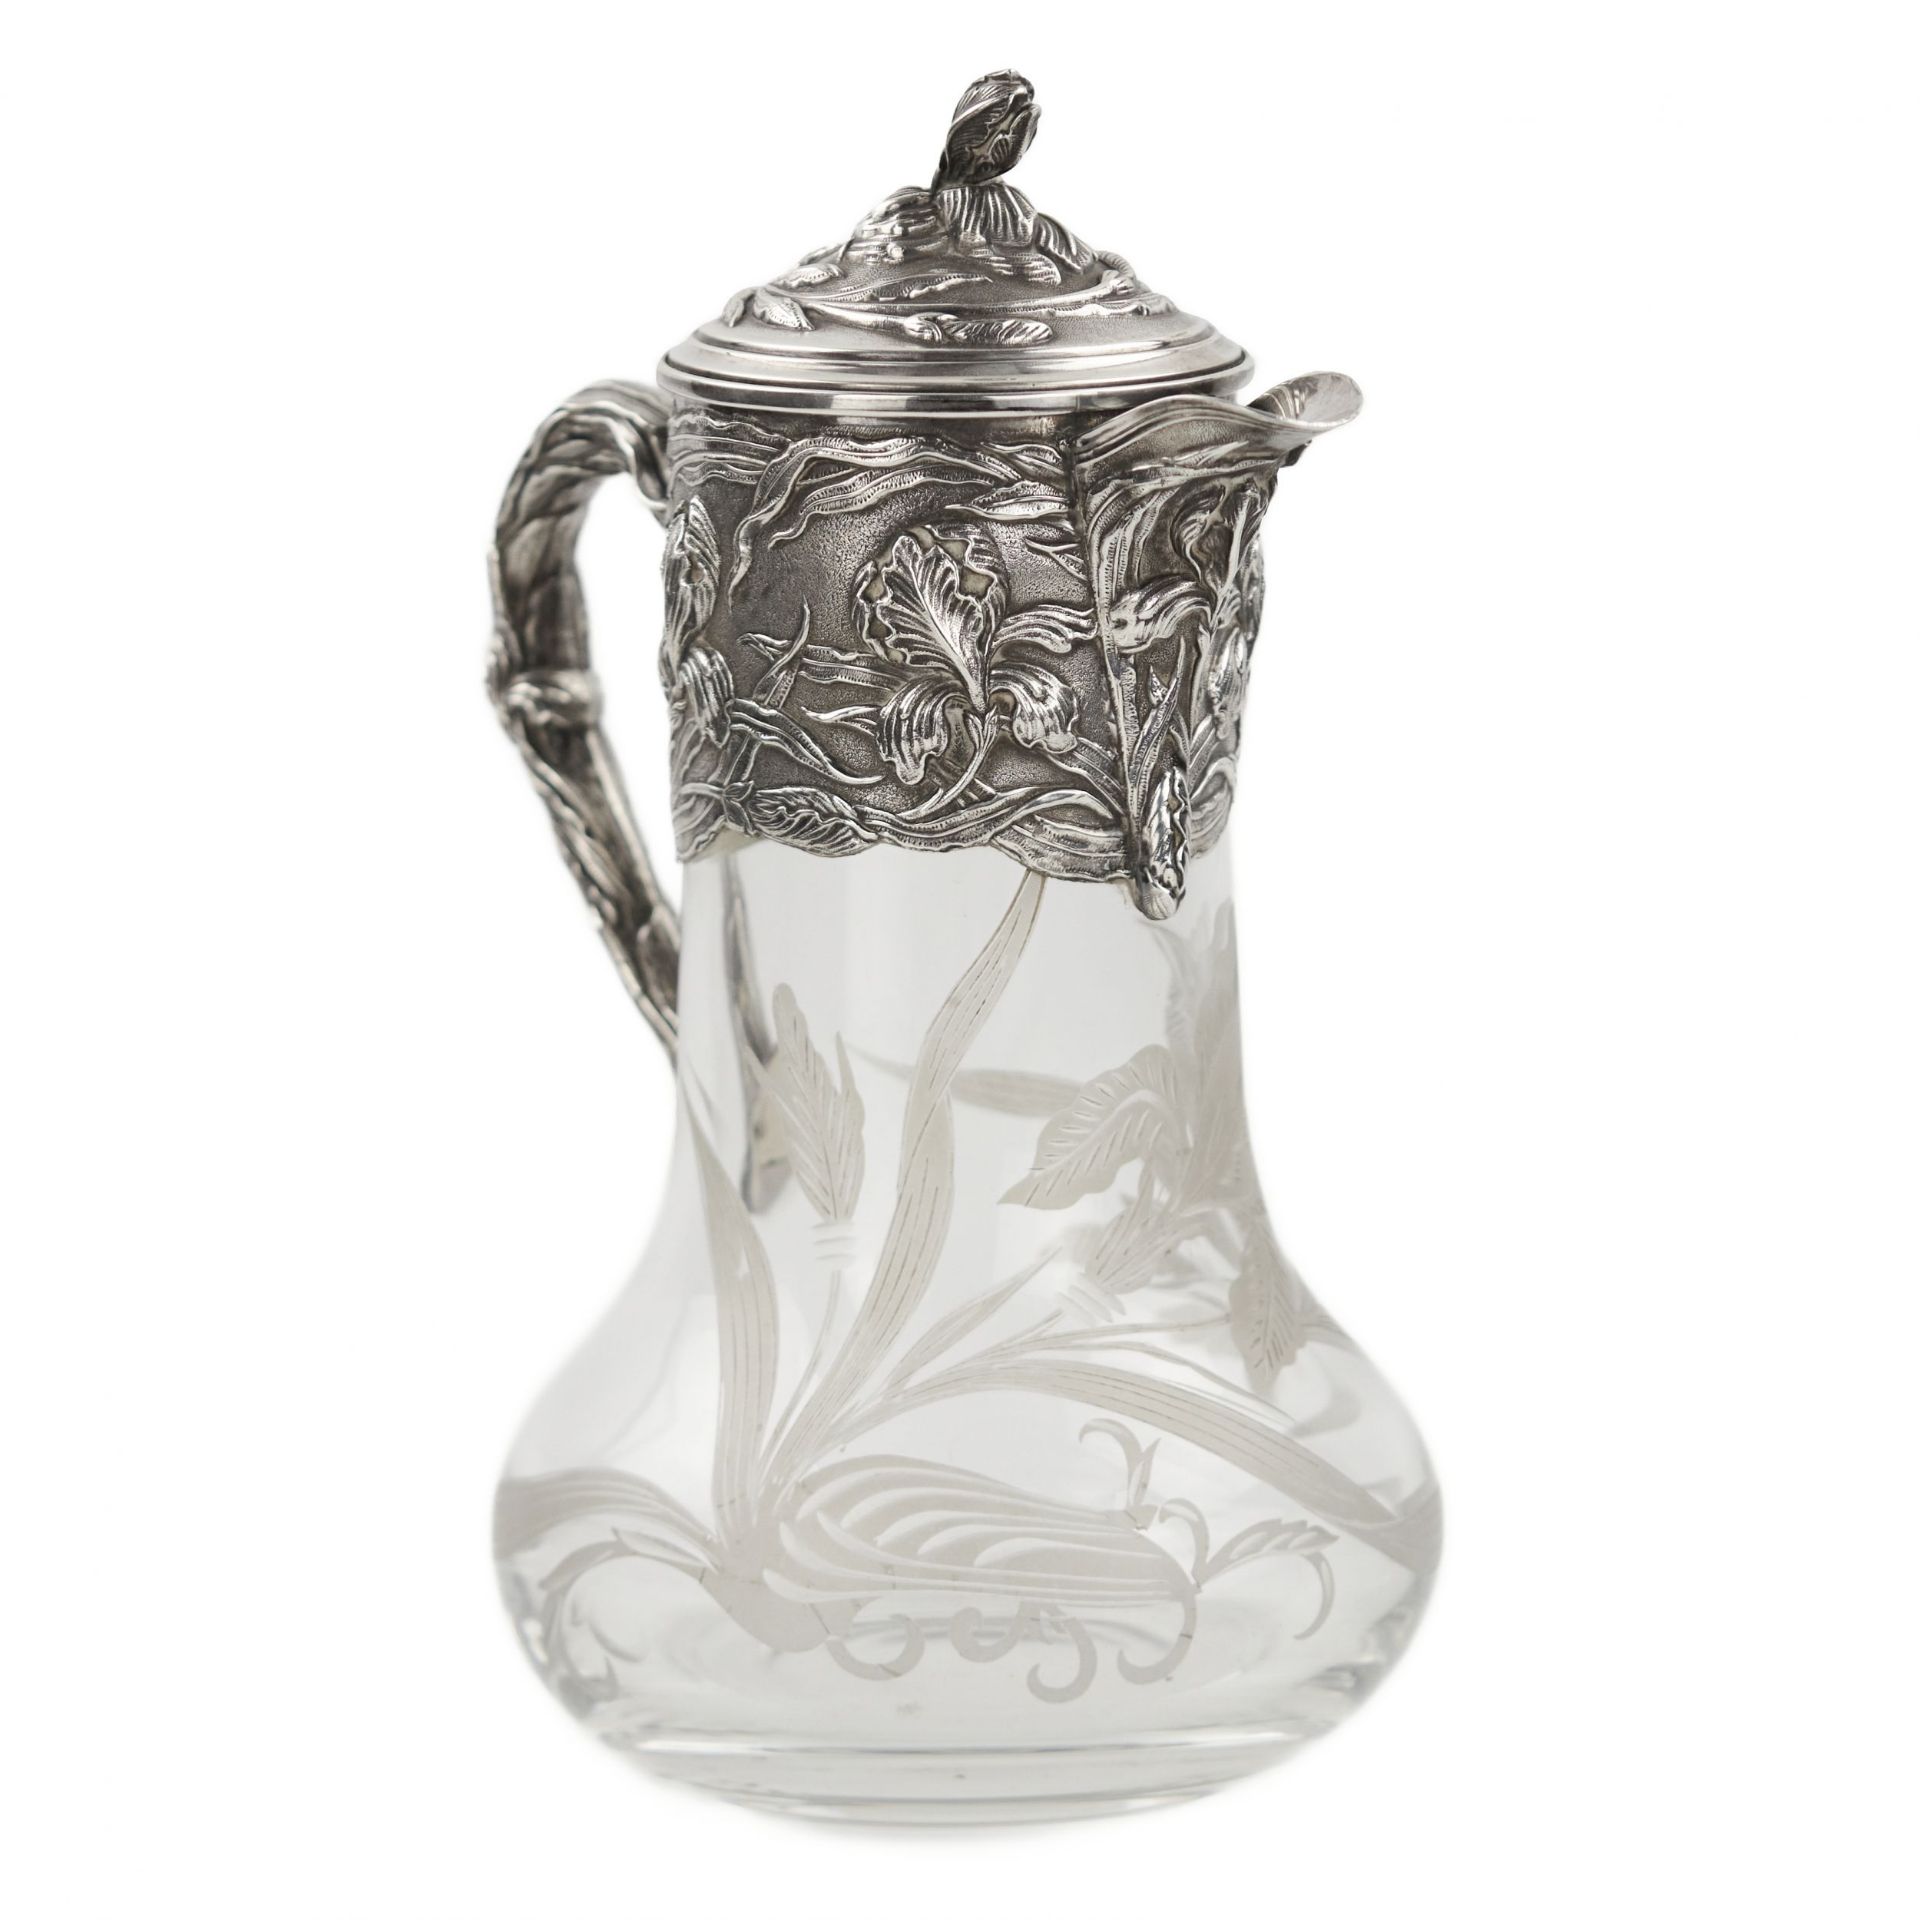 Crystal jug in silver from the Art Nouveau era. - Image 2 of 8